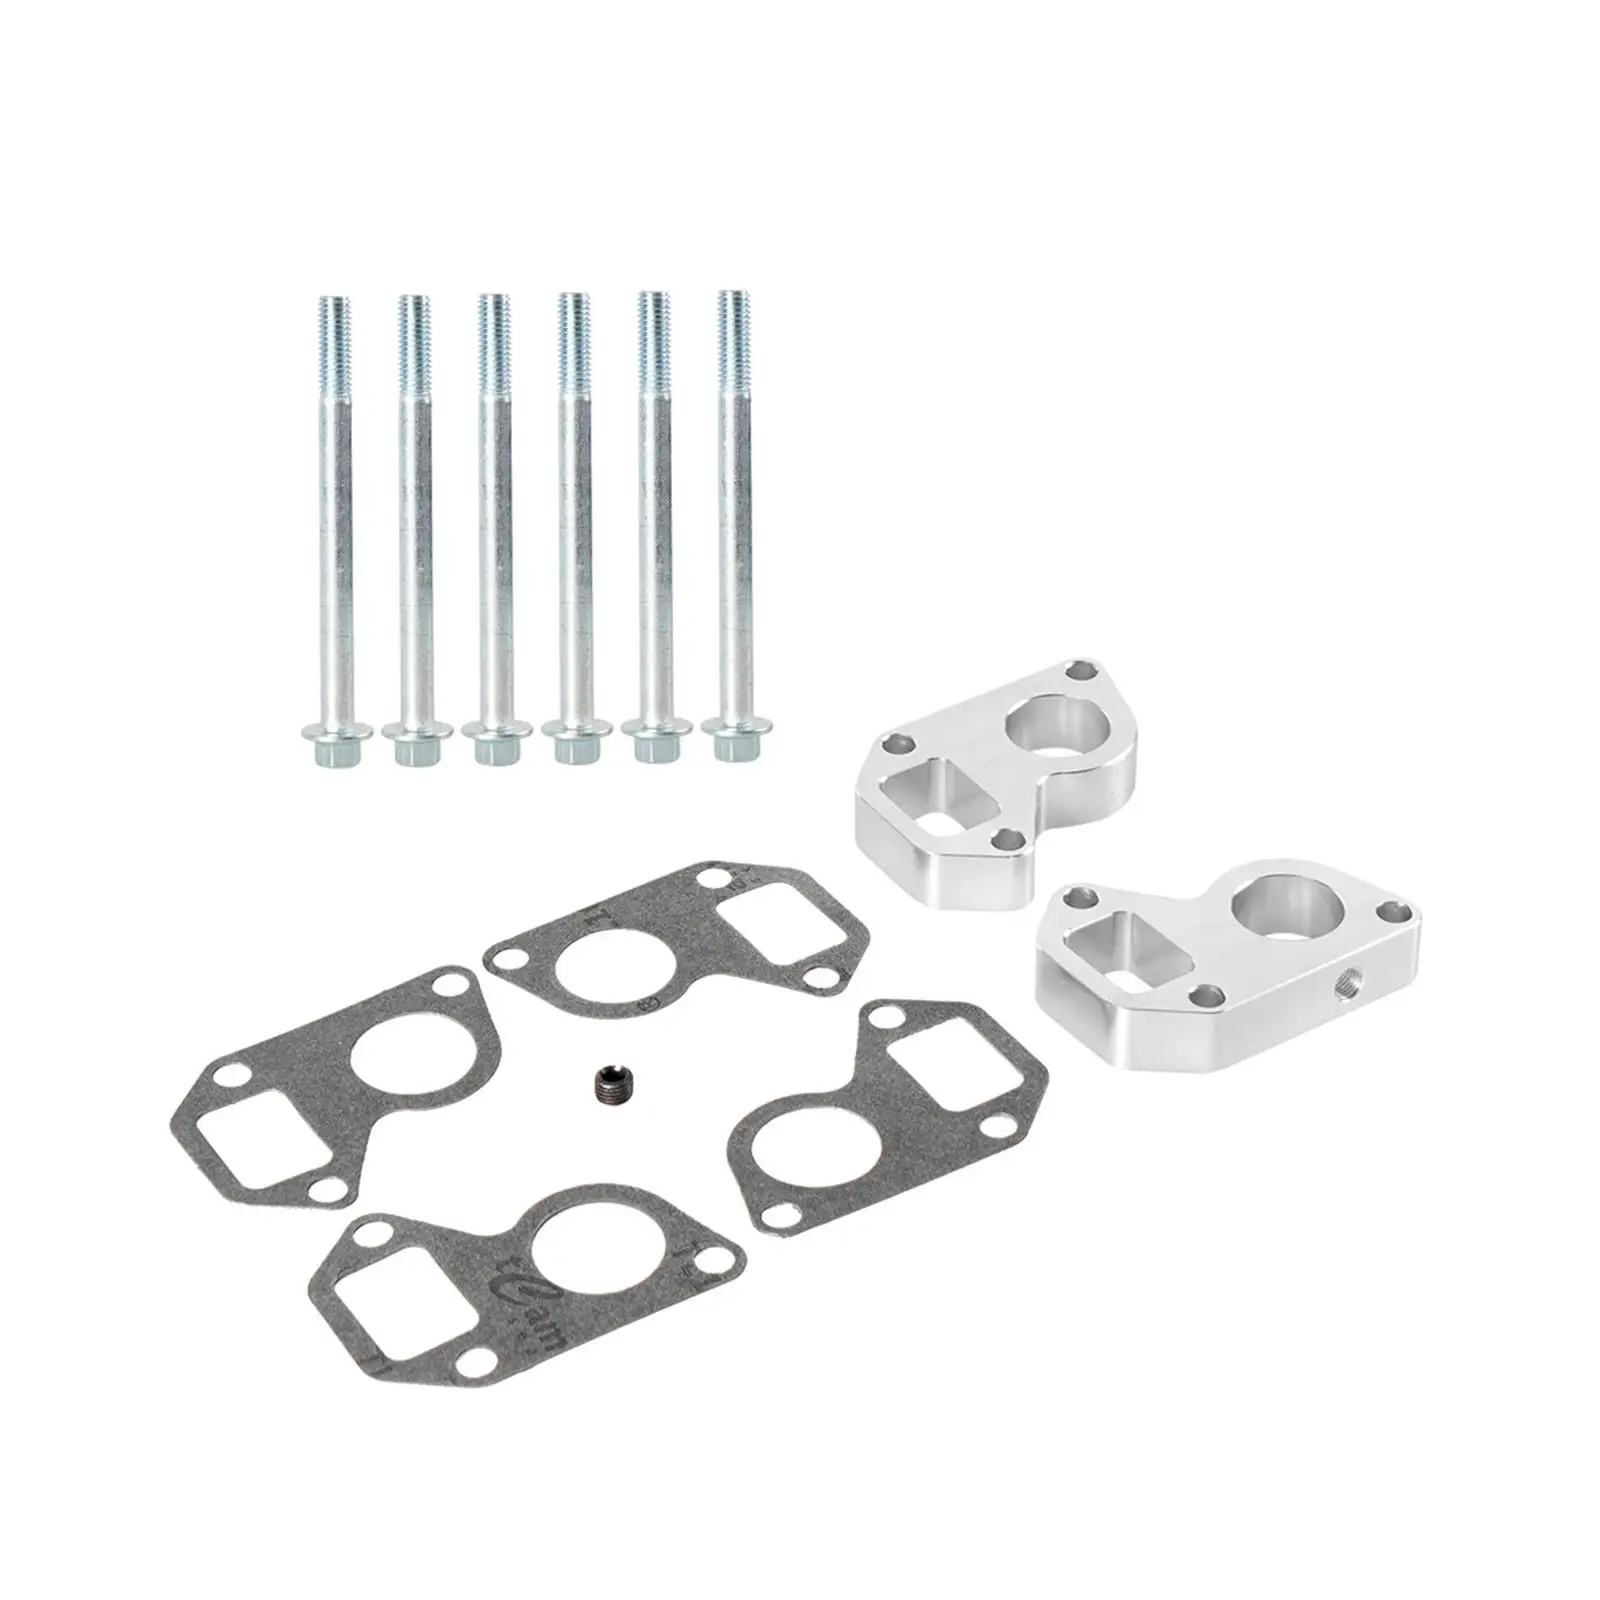 Water Pump Spacer Adapter Swap Kit Easy Installation Bolts LS Water Pump Spacers Kit for Camaro LS1 to Truck LS Lq4 LS2 Lq9